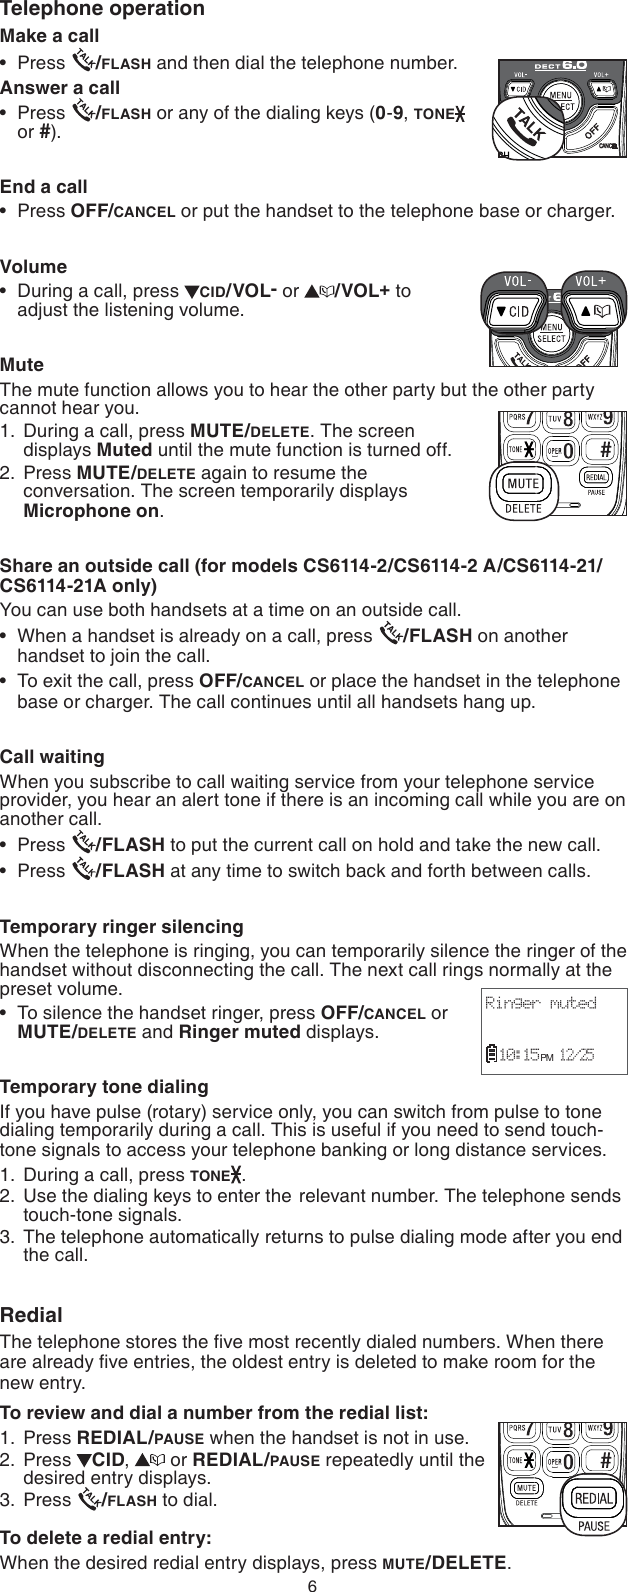 6Make a callPress  /FLASH and then dial the telephone number.Answer a callPress  /FLASH or any of the dialing keys (0-9, TONE  or #).End a callPress OFF/CANCEL or put the handset to the telephone base or charger.VolumeDuring a call, press  CID/VOL- or  /VOL+ to  adjust the listening volume.MuteThe mute function allows you to hear the other party but the other party cannot hear you.During a call, press MUTE/DELETE. The screen displays Muted until the mute function is turned off.Press MUTE/DELETE again to resume the   conversation. The screen temporarily displays Microphone on.Share an outside call (for models CS6114-2/CS6114-2 A/CS6114-21/CS6114-21A only)You can use both handsets at a time on an outside call.When a handset is already on a call, press  /FLASH on another handset to join the call.To exit the call, press OFF/CANCEL or place the handset in the telephone base or charger. The call continues until all handsets hang up.Call waitingWhen you subscribe to call waiting service from your telephone service provider, you hear an alert tone if there is an incoming call while you are on another call. Press  /FLASH to put the current call on hold and take the new call.Press  /FLASH at any time to switch back and forth between calls.Temporary ringer silencingWhen the telephone is ringing, you can temporarily silence the ringer of the handset without disconnecting the call. The next call rings normally at the preset volume.To silence the handset ringer, press OFF/CANCEL or MUTE/DELETE and Ringer muted displays.Temporary tone dialingIf you have pulse (rotary) service only, you can switch from pulse to tone dialing temporarily during a call. This is useful if you need to send touch-tone signals to access your telephone banking or long distance services.During a call, press TONE .Use the dialing keys to enter the  relevant number. The telephone sends touch-tone signals.The telephone automatically returns to pulse dialing mode after you end the call.RedialThe telephone stores the ﬁve most recently dialed numbers. When there are already ﬁve entries, the oldest entry is deleted to make room for the new entry.To review and dial a number from the redial list:Press REDIAL/PAUSE when the handset is not in use.Press  CID,   or REDIAL/PAUSE repeatedly until the desired entry displays.Press  /FLASH to dial.To delete a redial entry:When the desired redial entry displays, press MUTE/DELETE.••••1.2.•••••1.2.3.1.2.3.Telephone operationCANCELRinger muted  10:15 PM 12/25